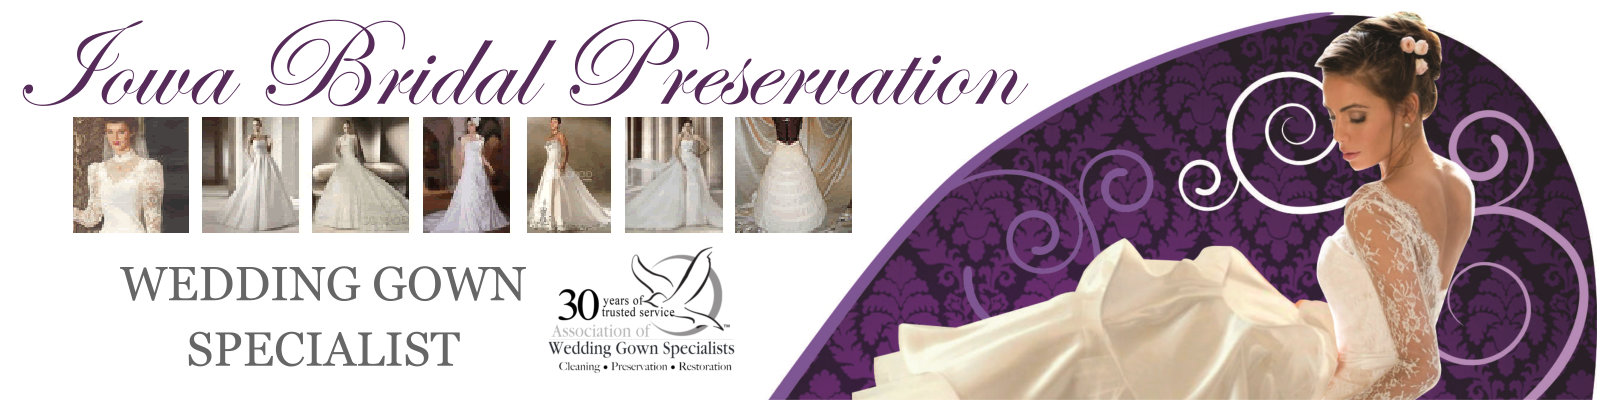 Our Partners - Iowa Bridal Preservation